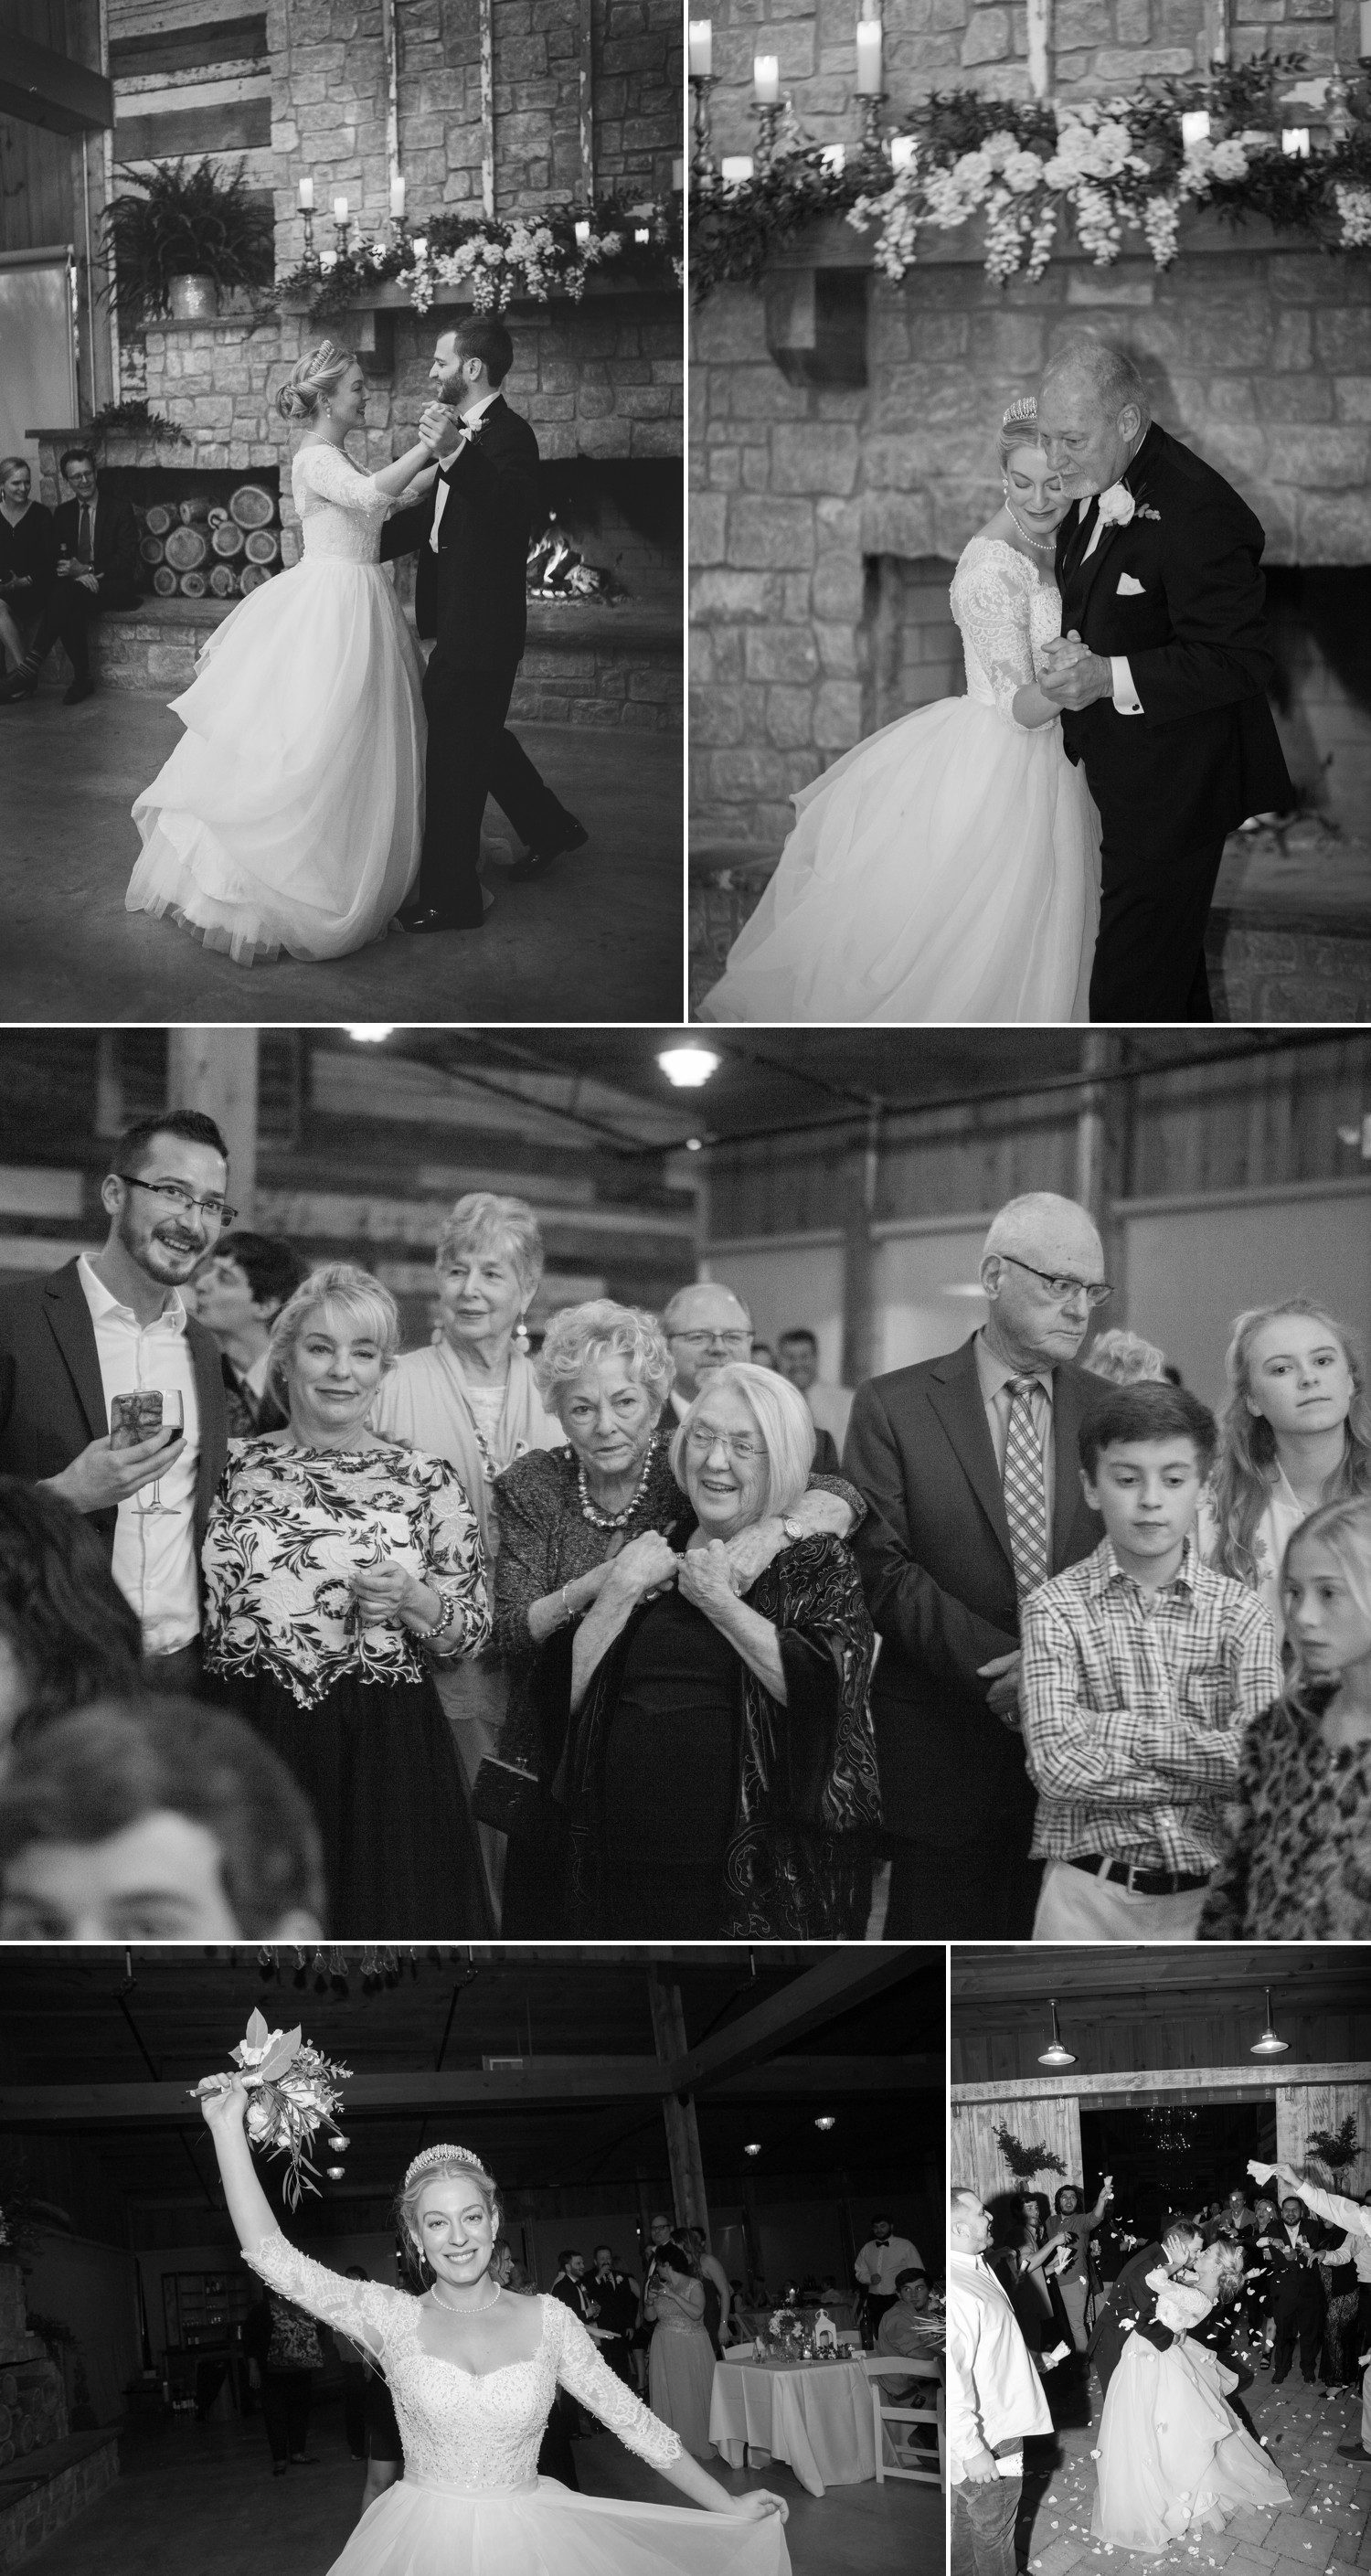 Wedding reception at Homestead Manor Thompsons Station, TN / Krista Lee Photography and Creations by Debbie Planner